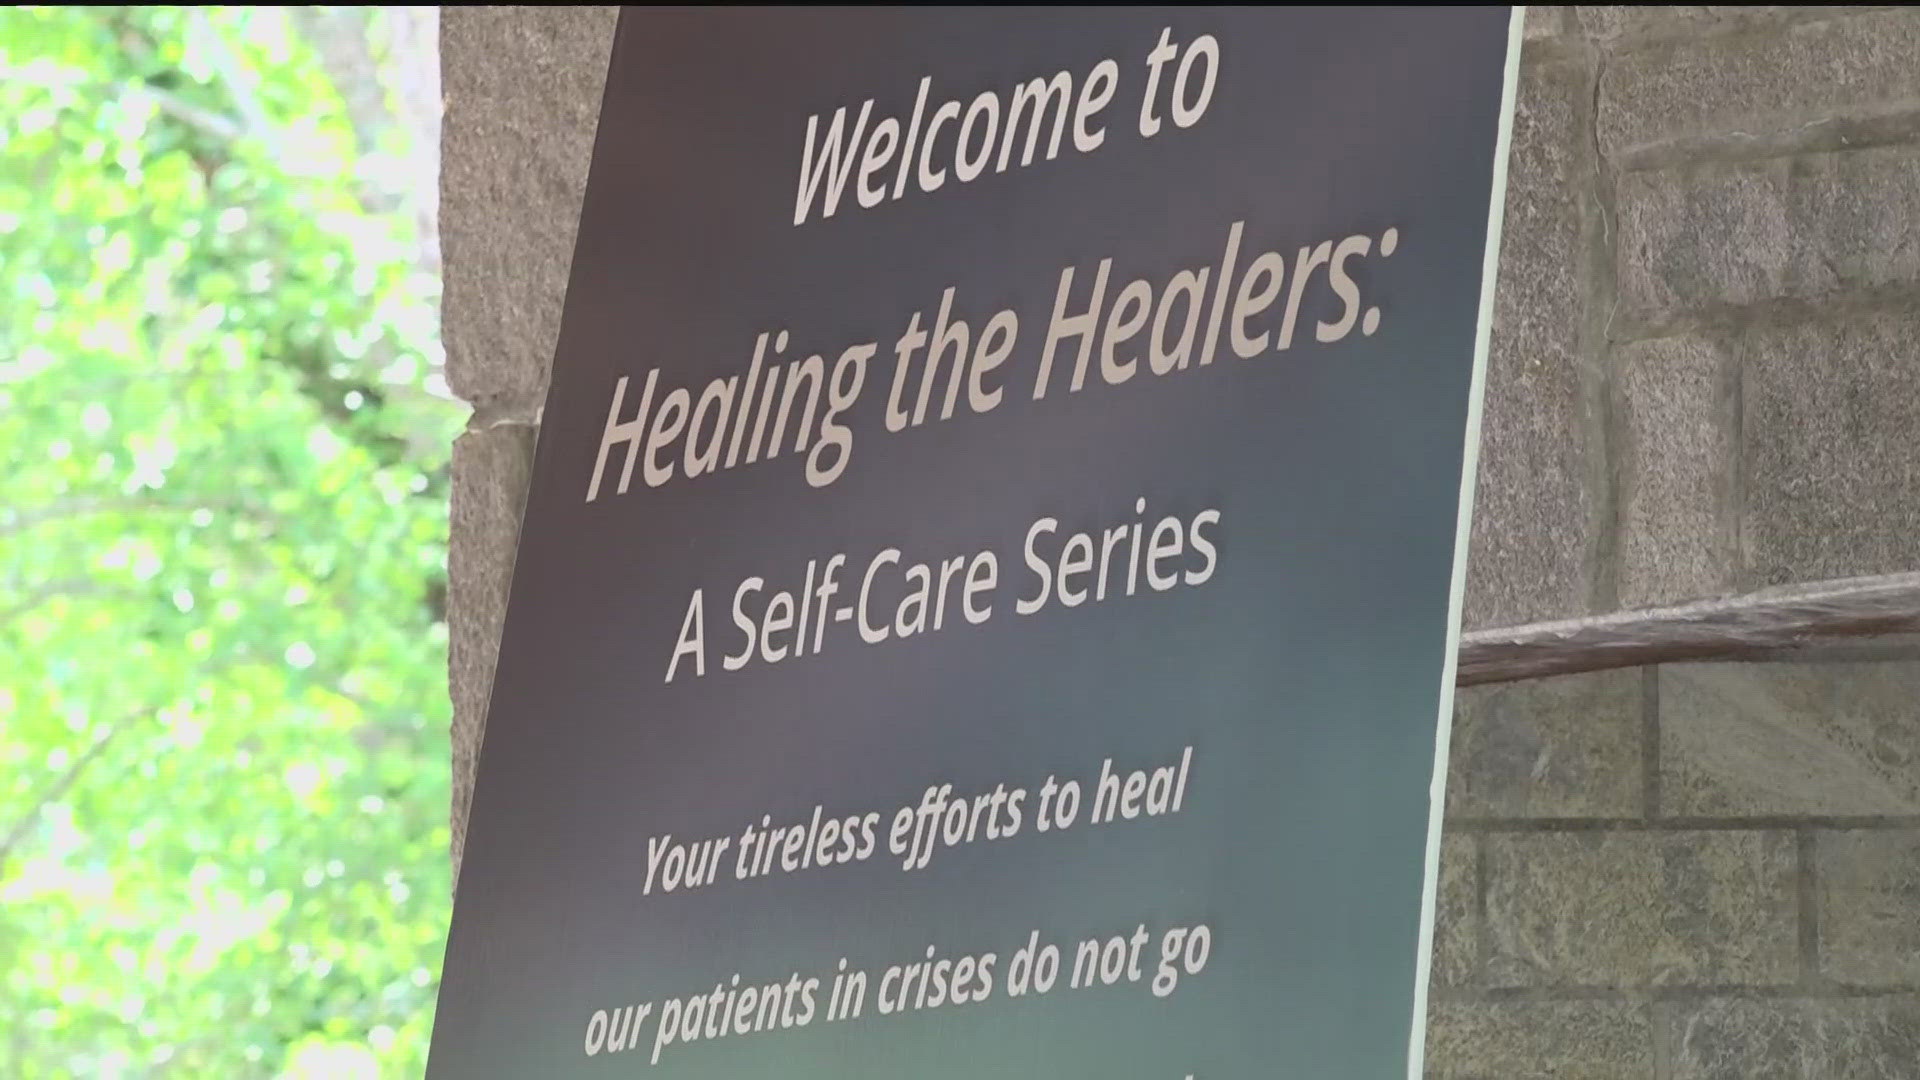 The event was aimed at giving healthcare workers a much-needed break.